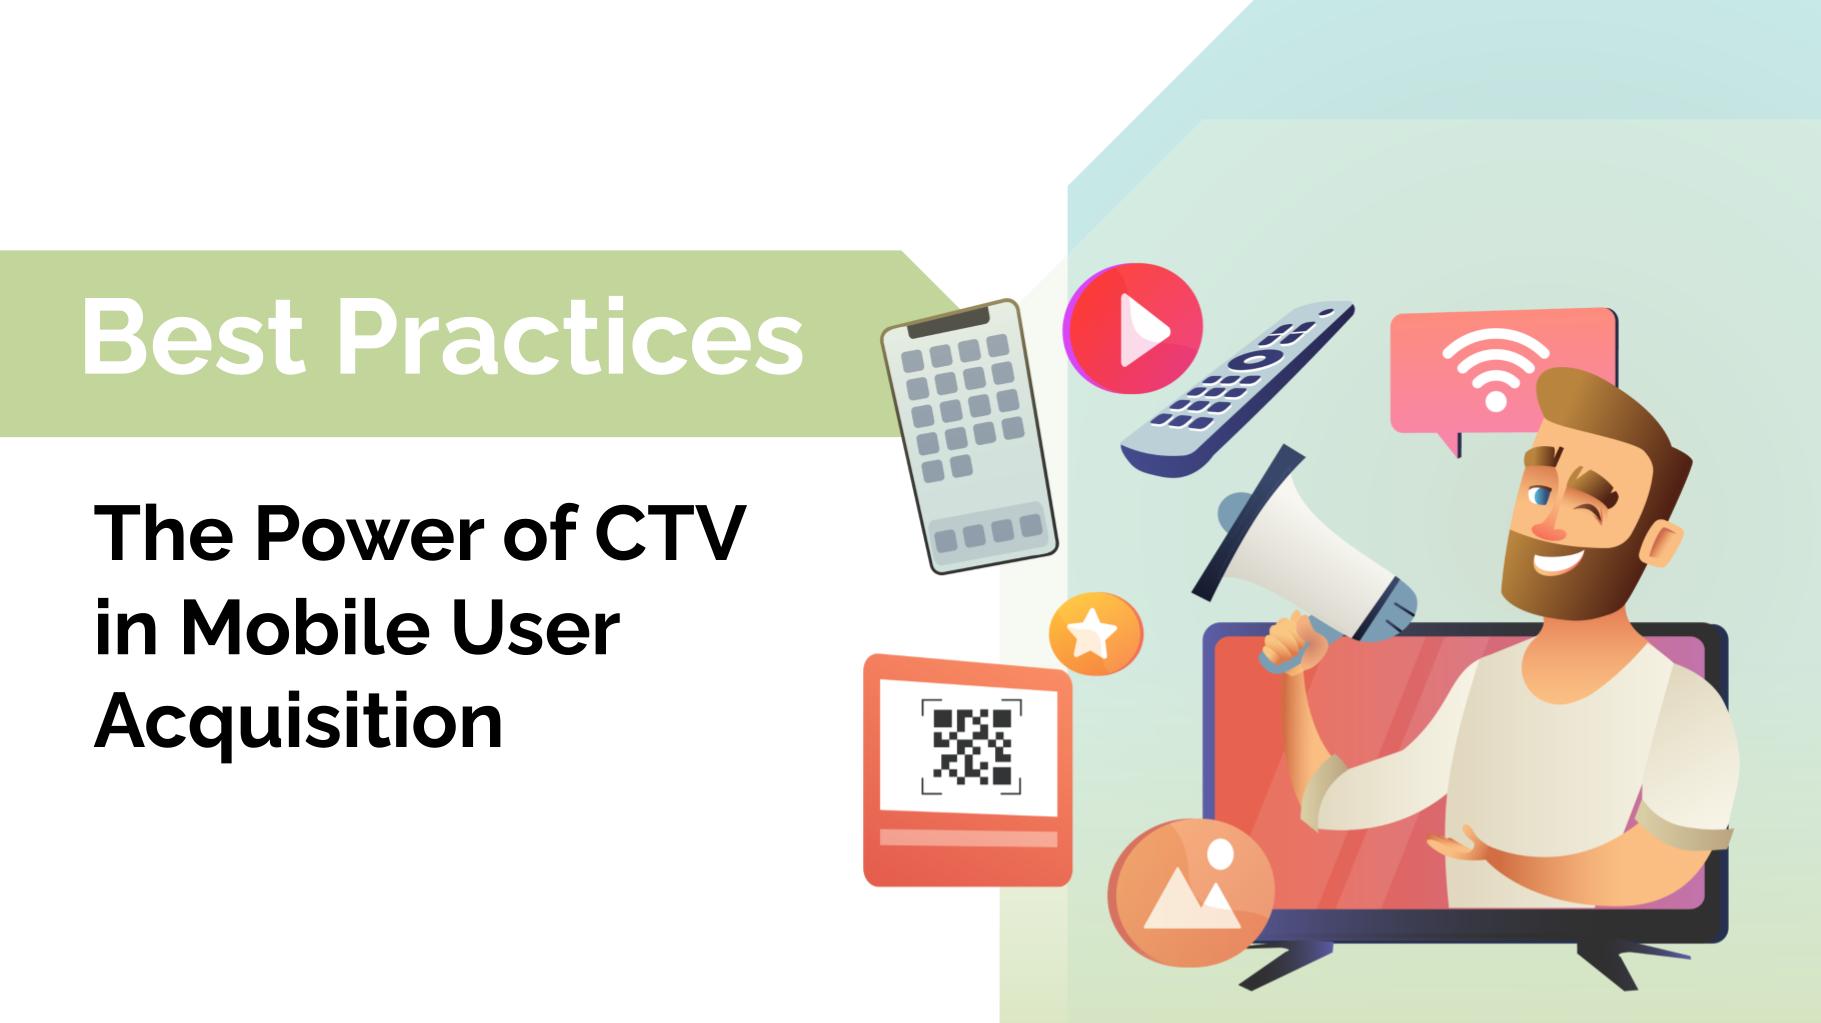 Beyond Awareness: The Power of CTV in Mobile User Acquisition